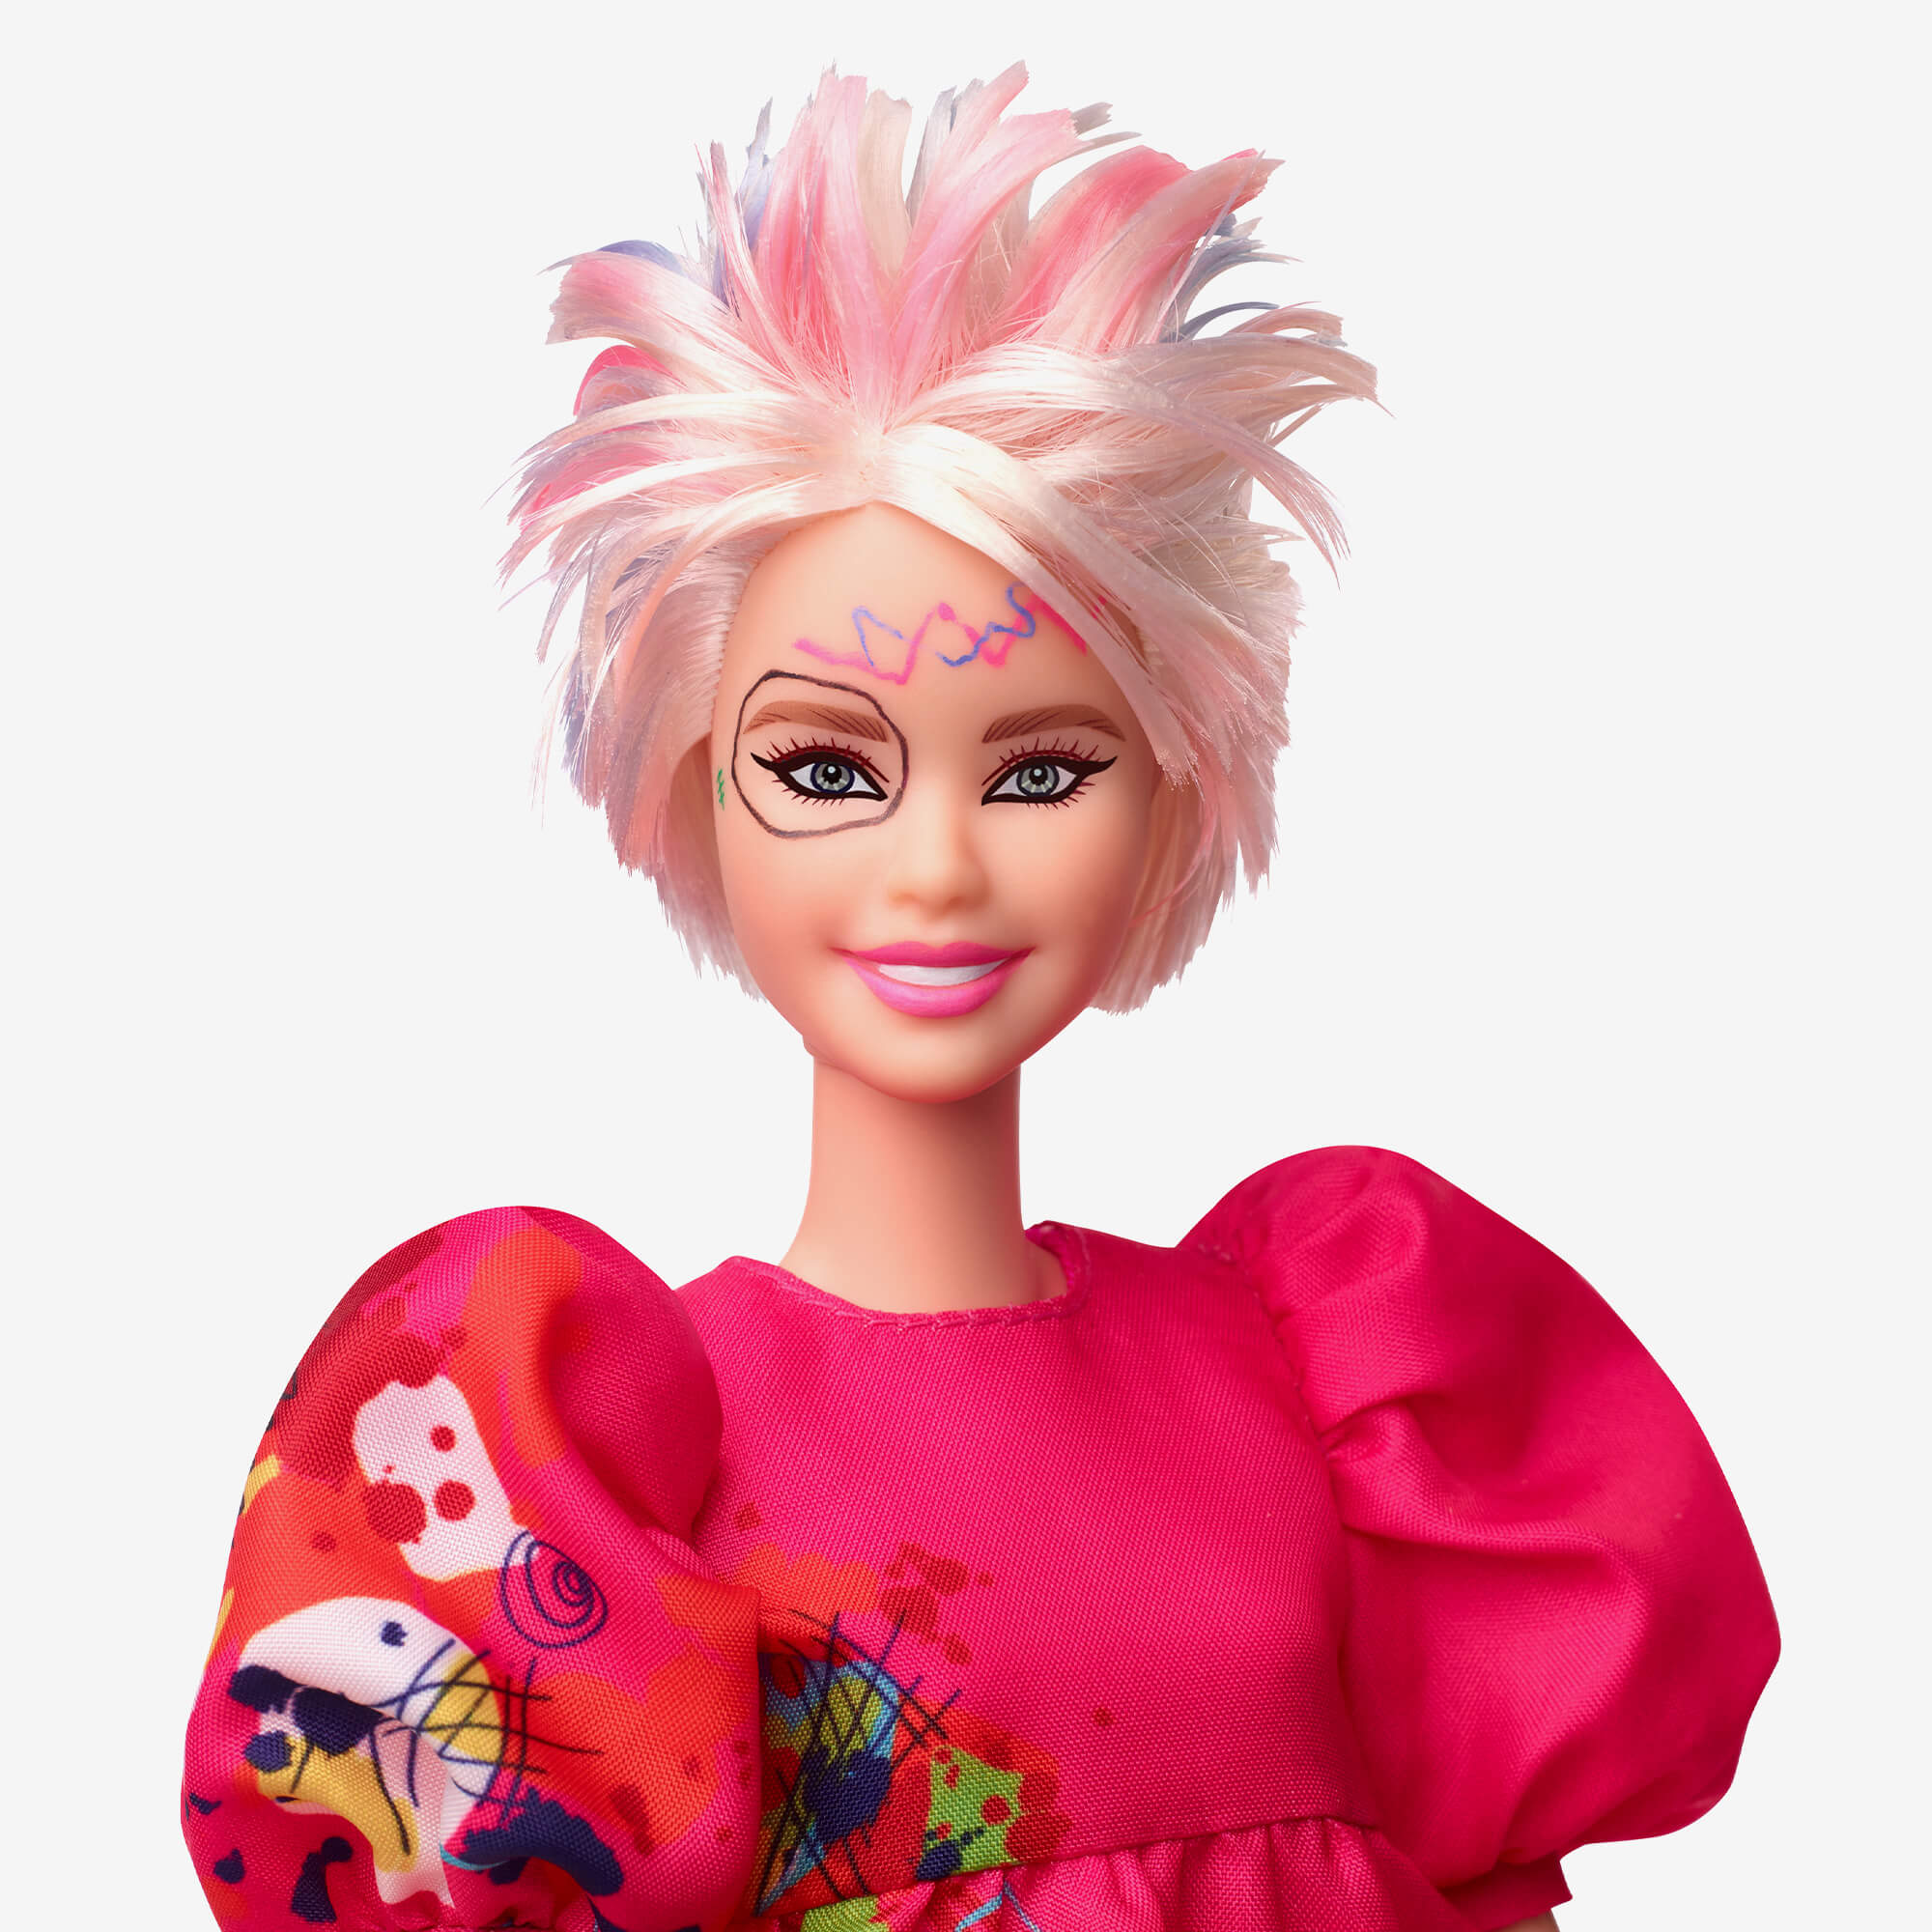 Mattel launches Weird Barbie inspired by the Barbie movie